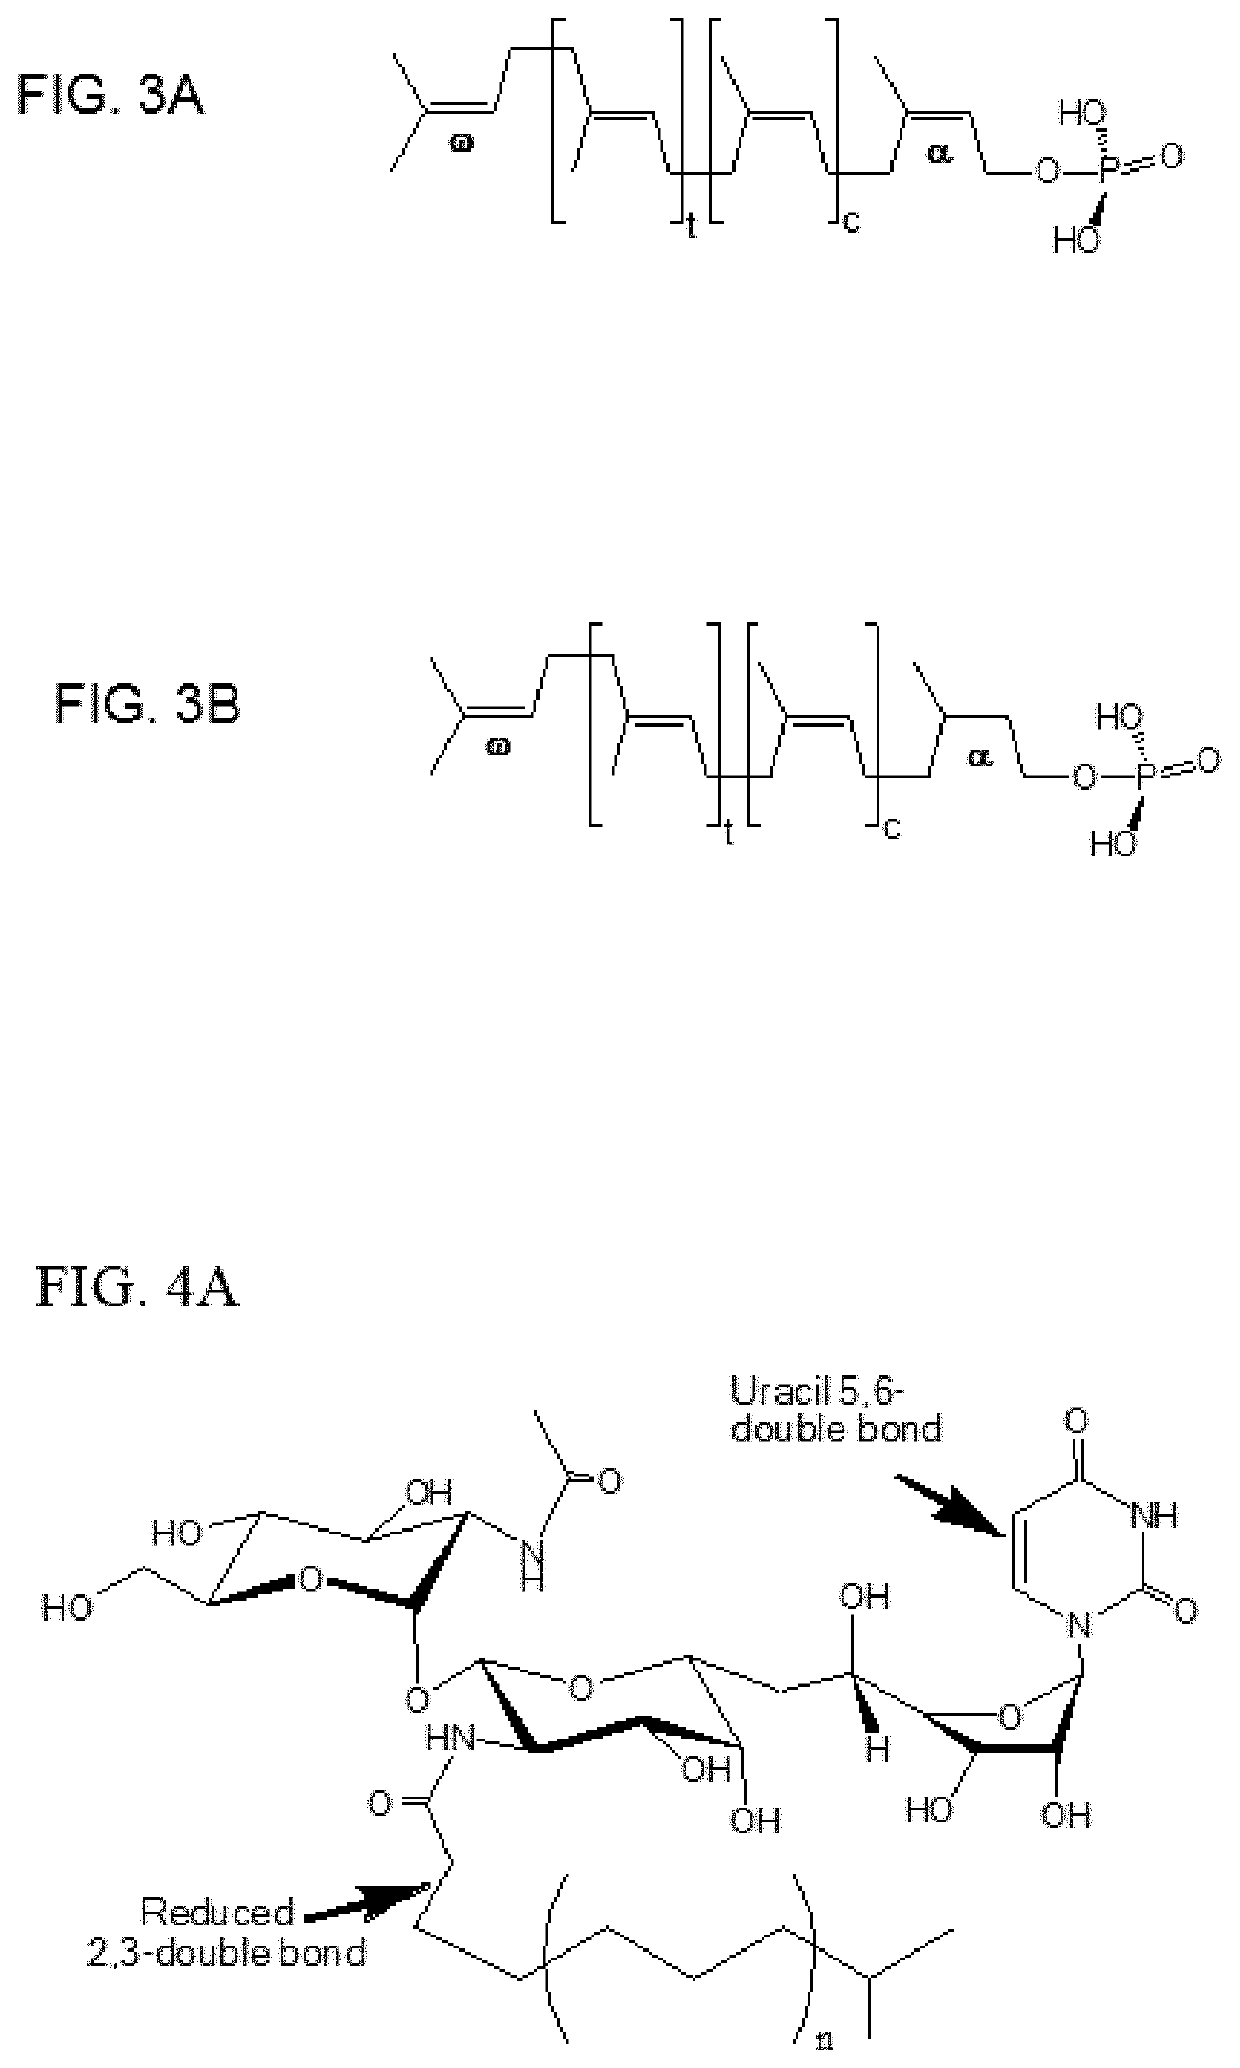 Tunicamycin related compounds with anti-bacterial activity